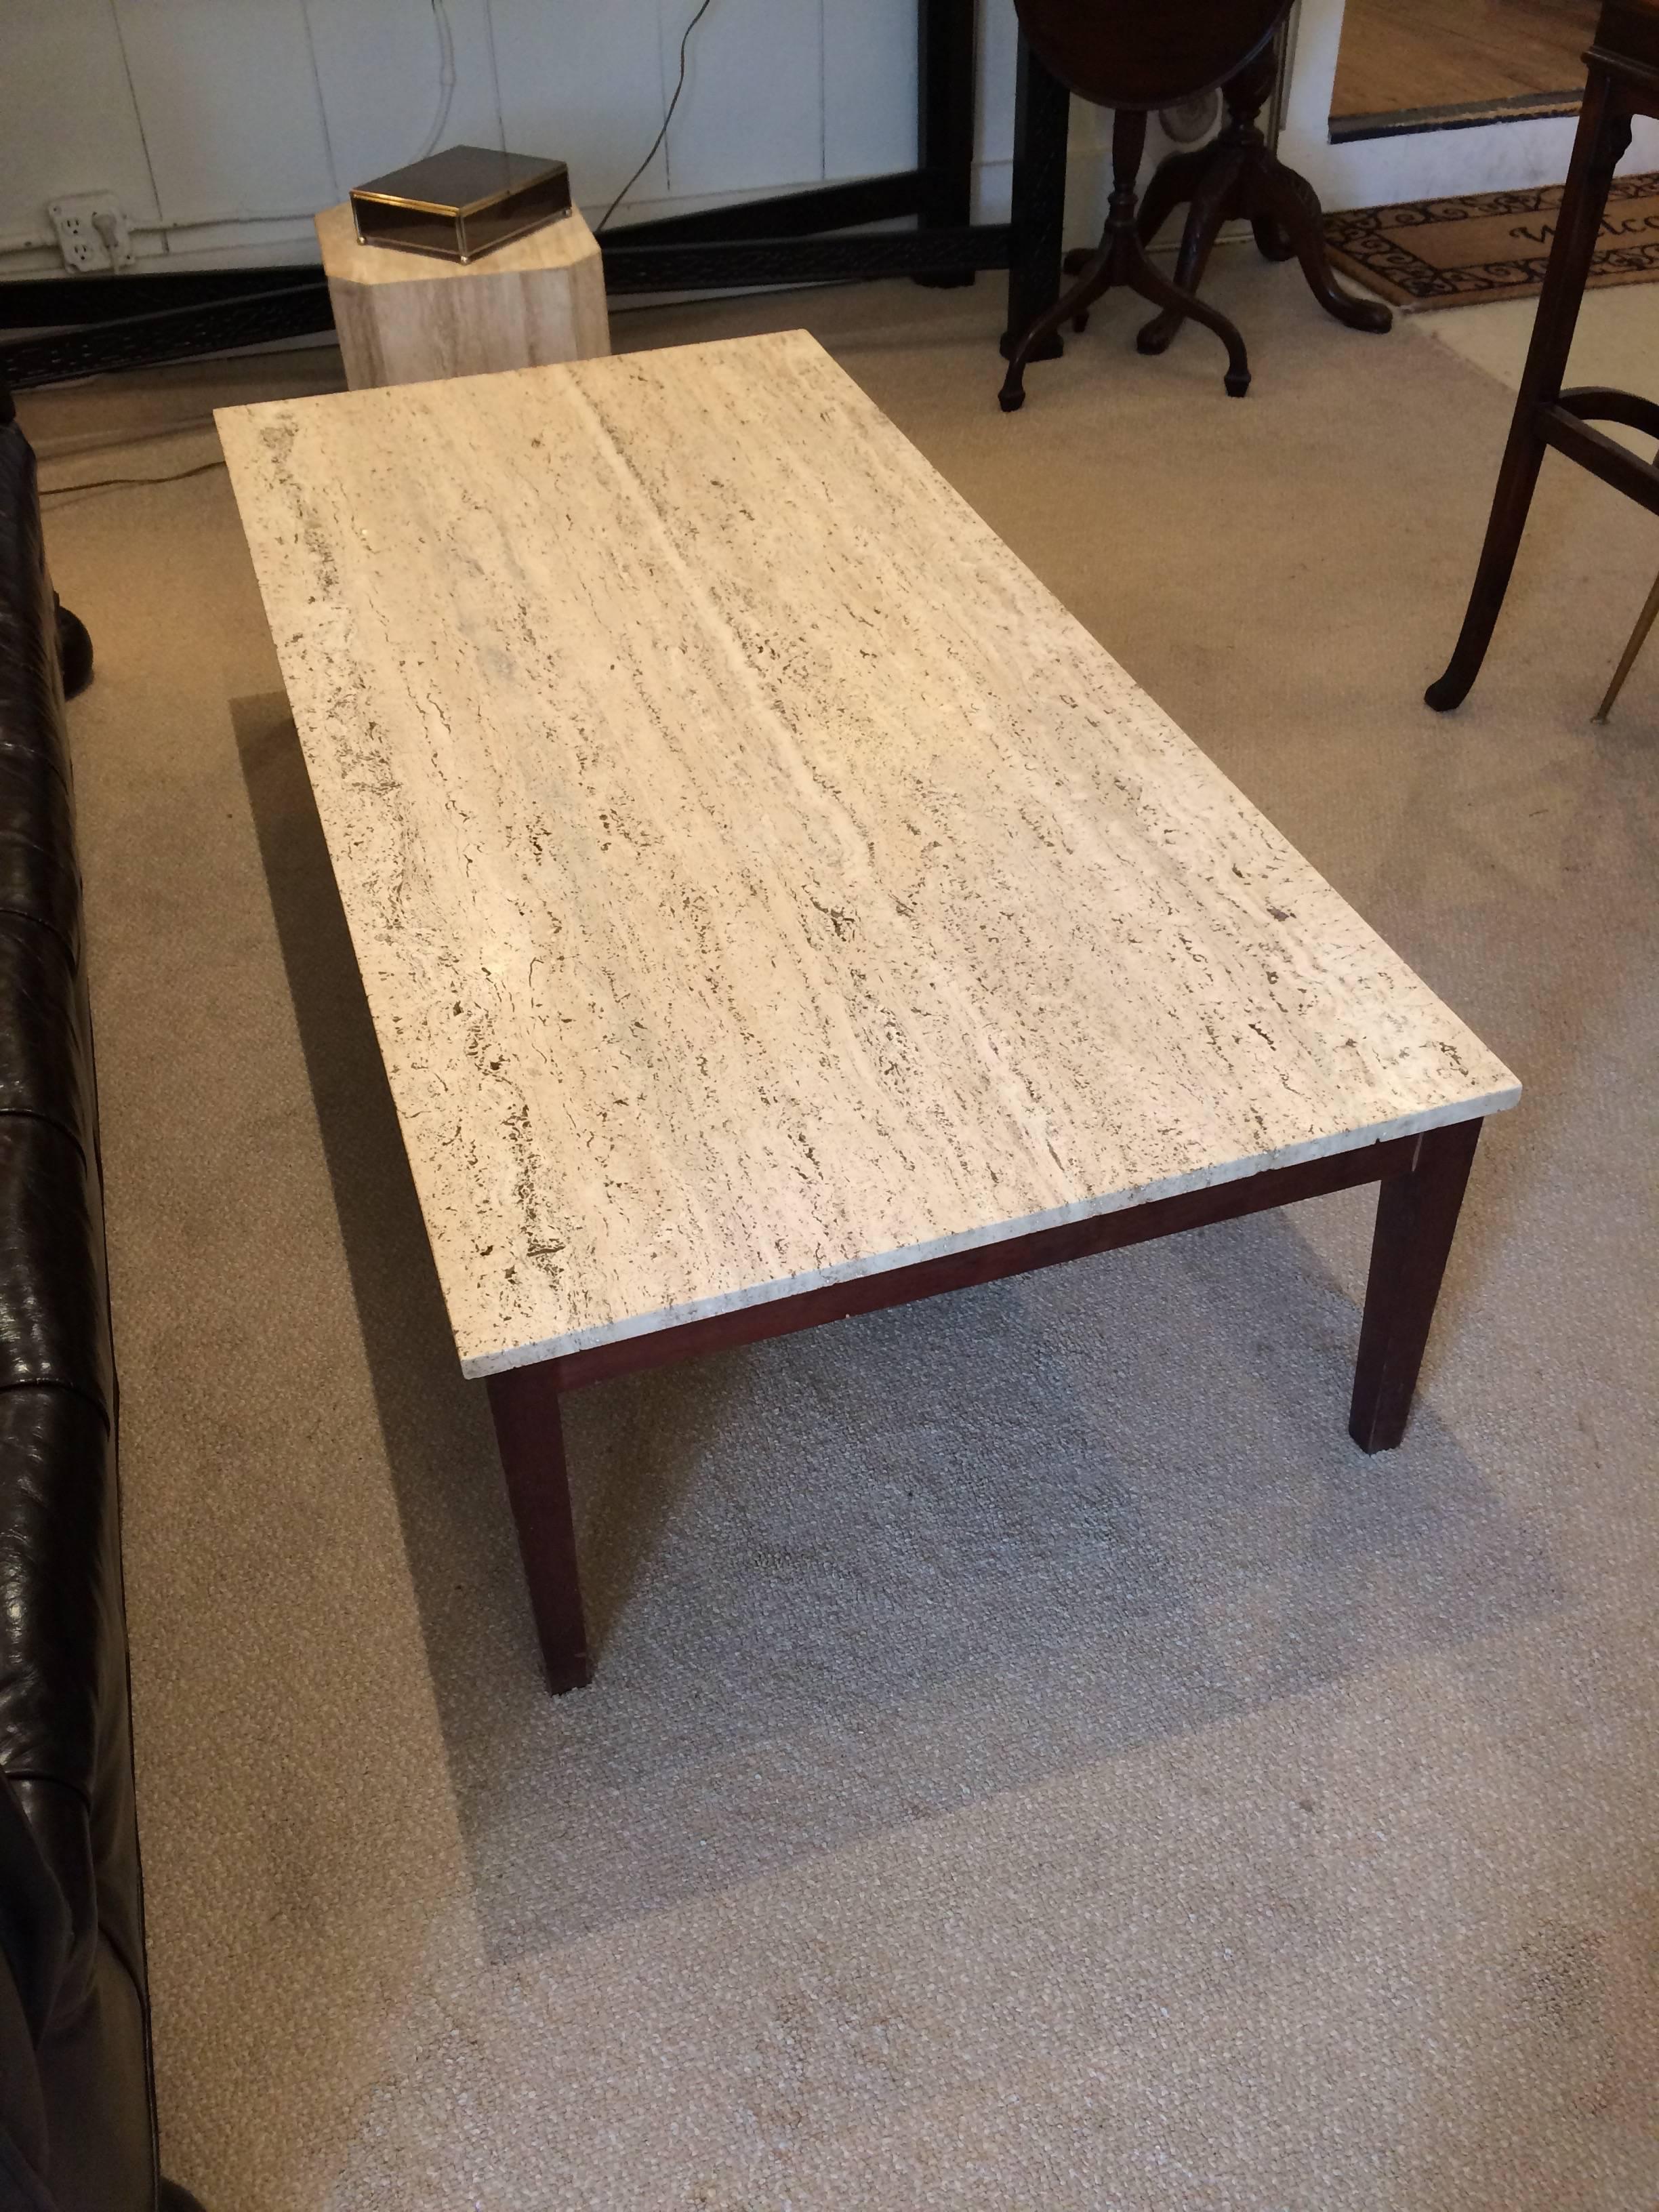 Beautiful Mid-Century Modern coffee table with clean lines and sleek look. Legs are teak and top is a handsome slab of travertine.